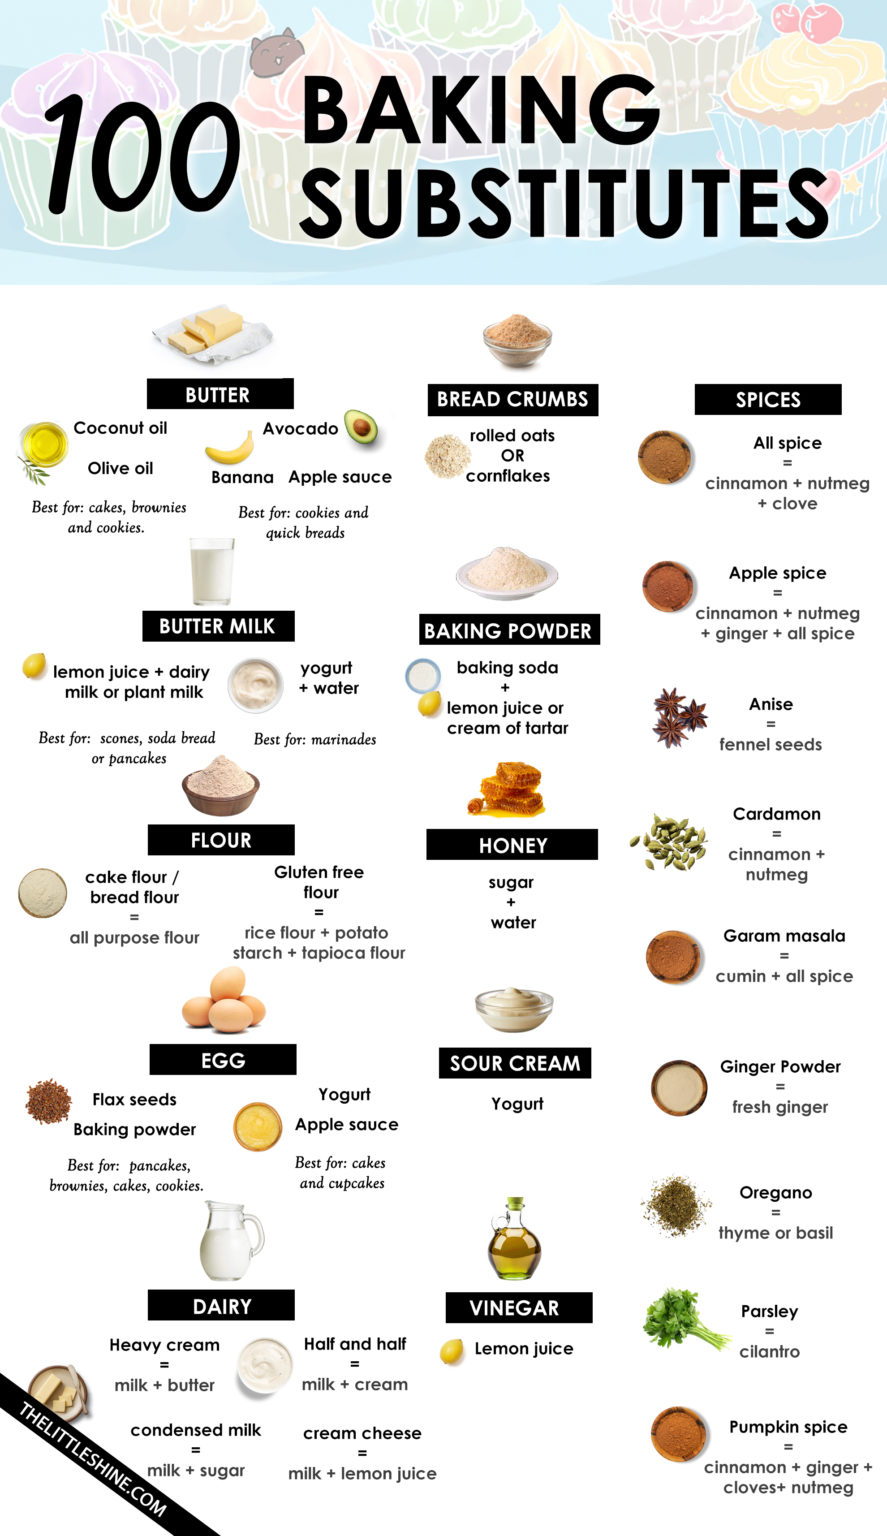 100 baking substitutes that covers every spice, liquid, flours and more ...